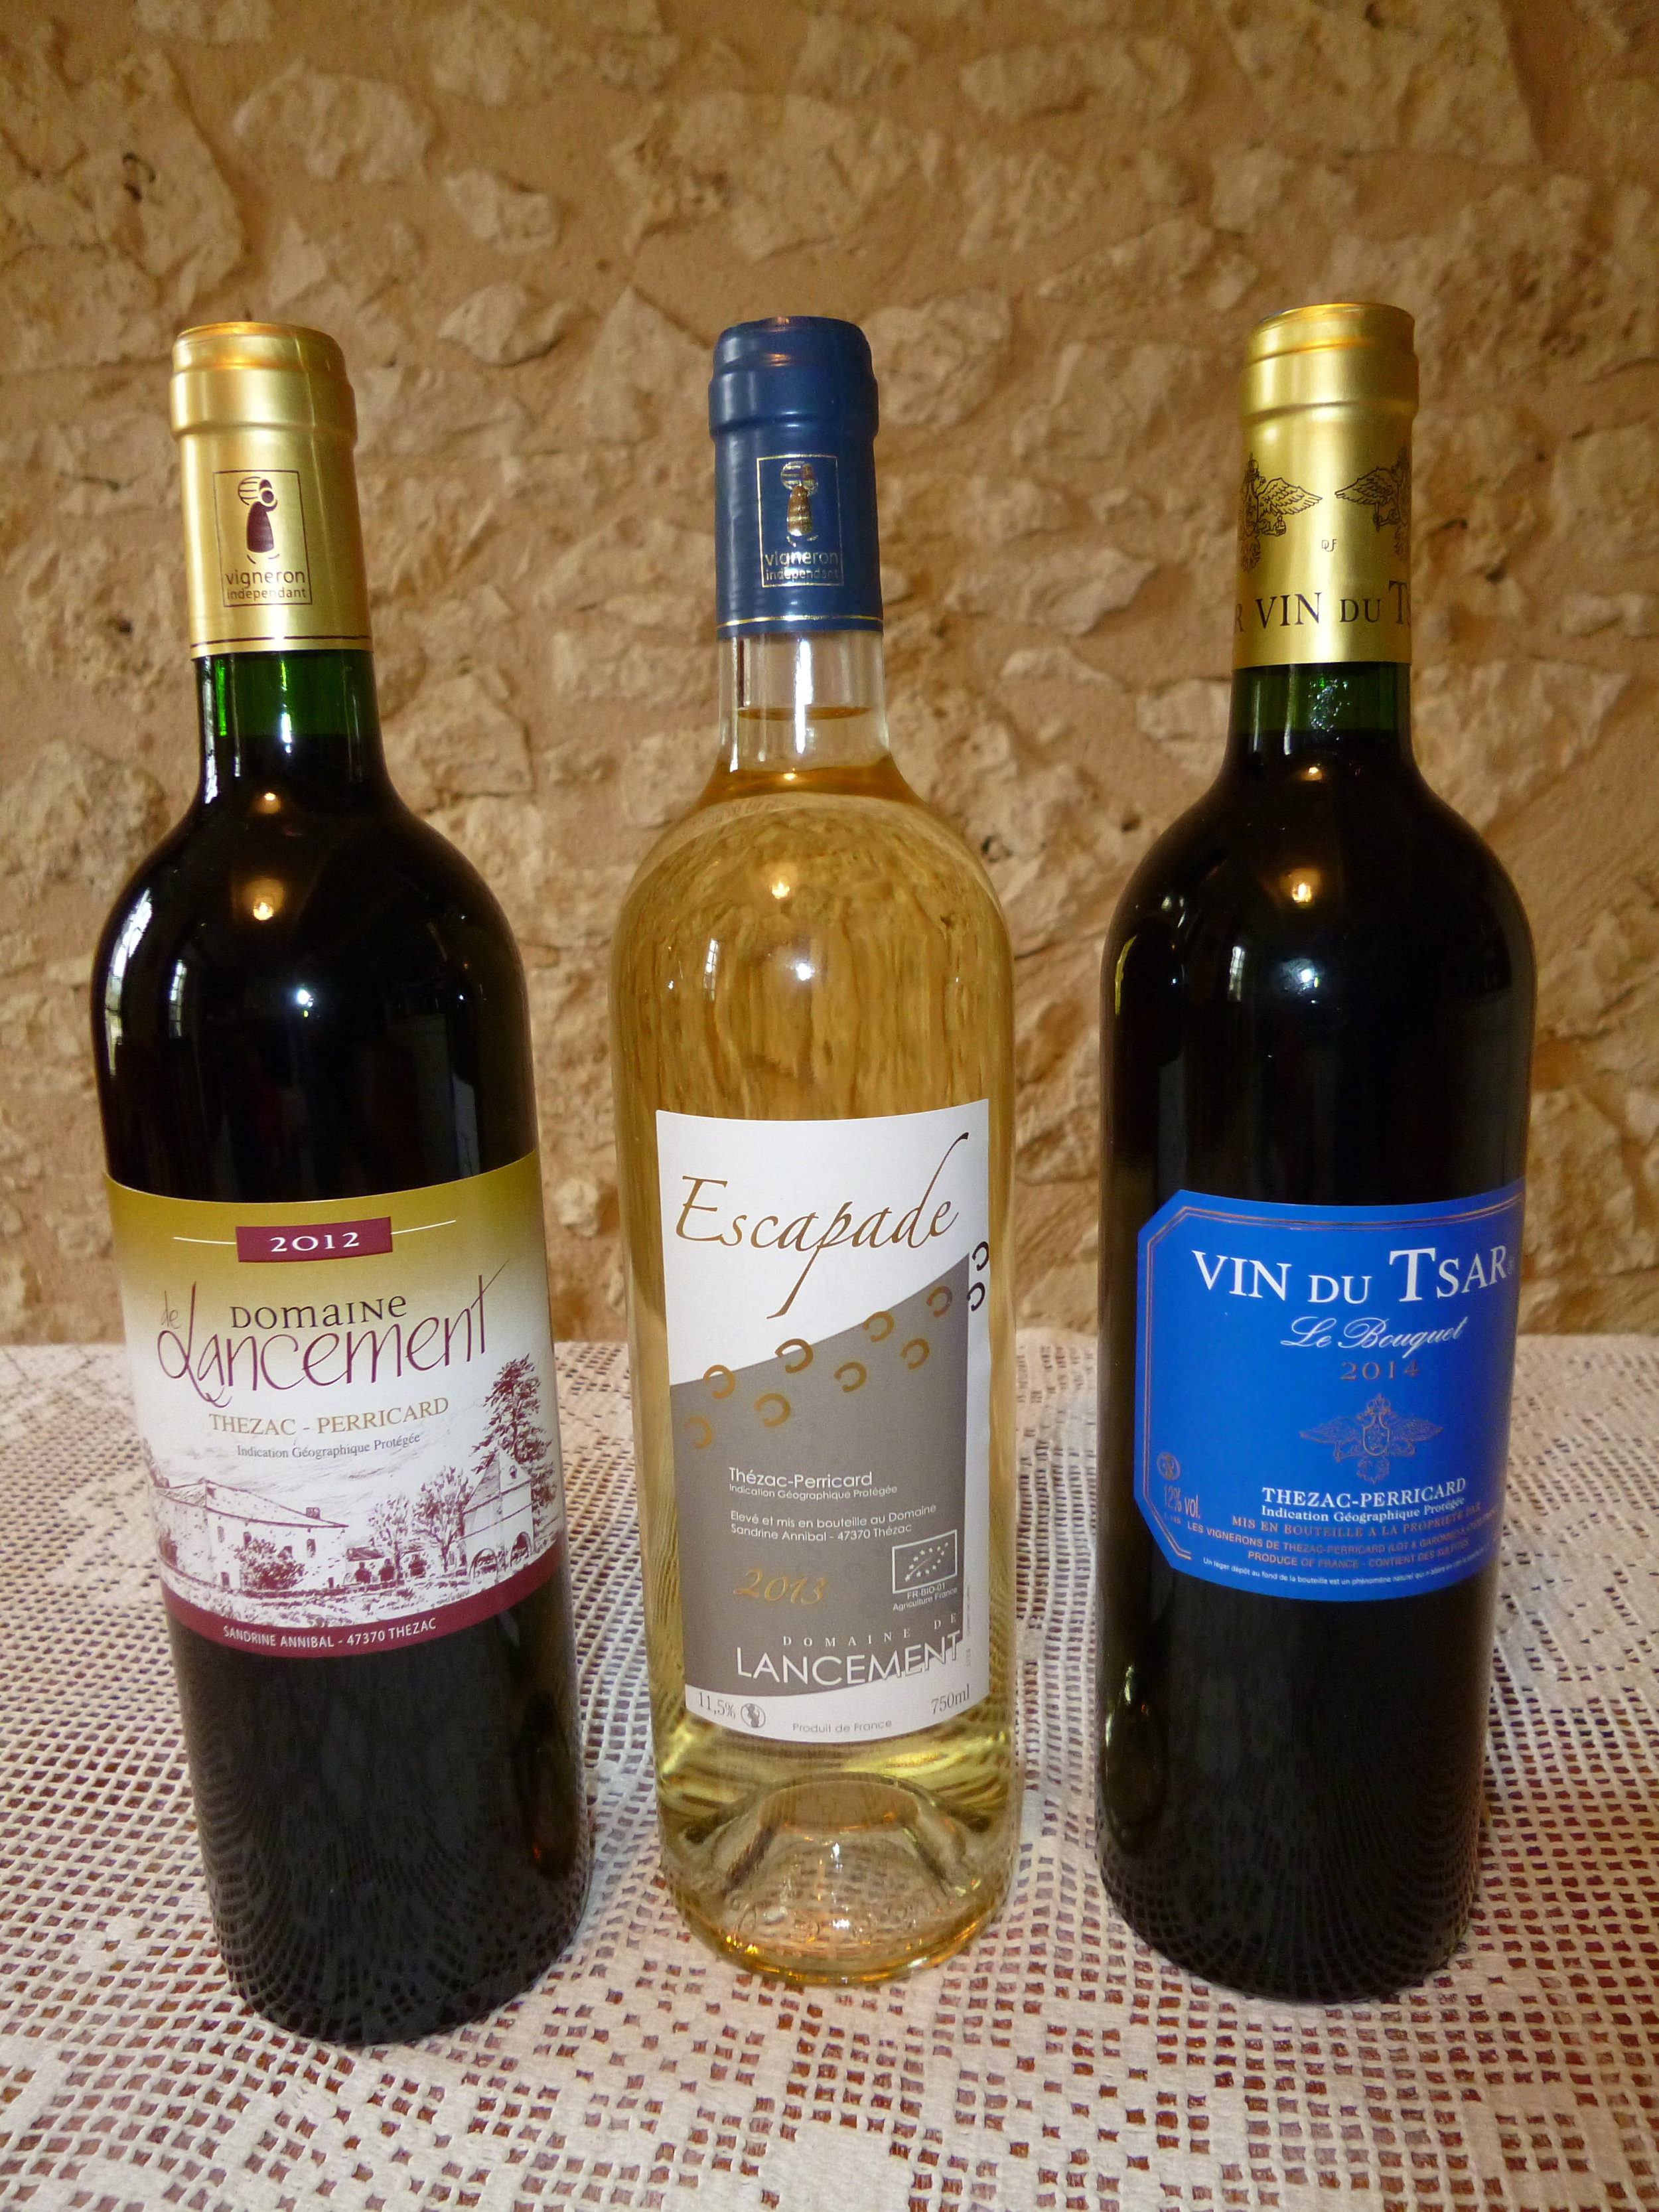 Some of the local wines